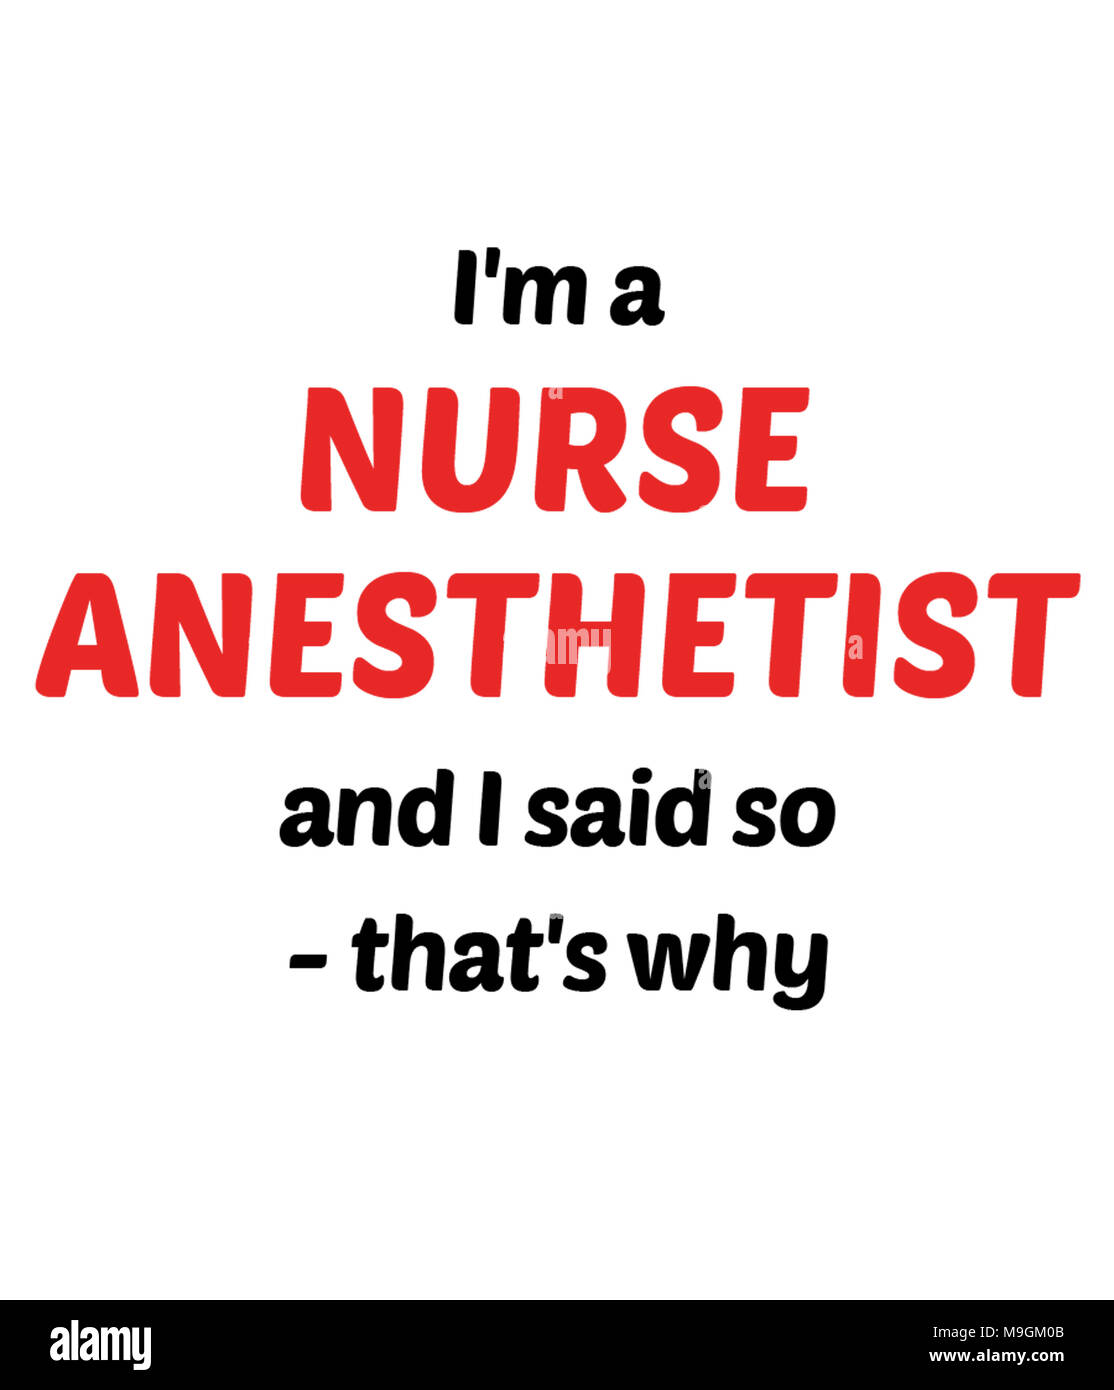 I'm a NURSE ANESTHETIST and I said so - that's why Stock Photo